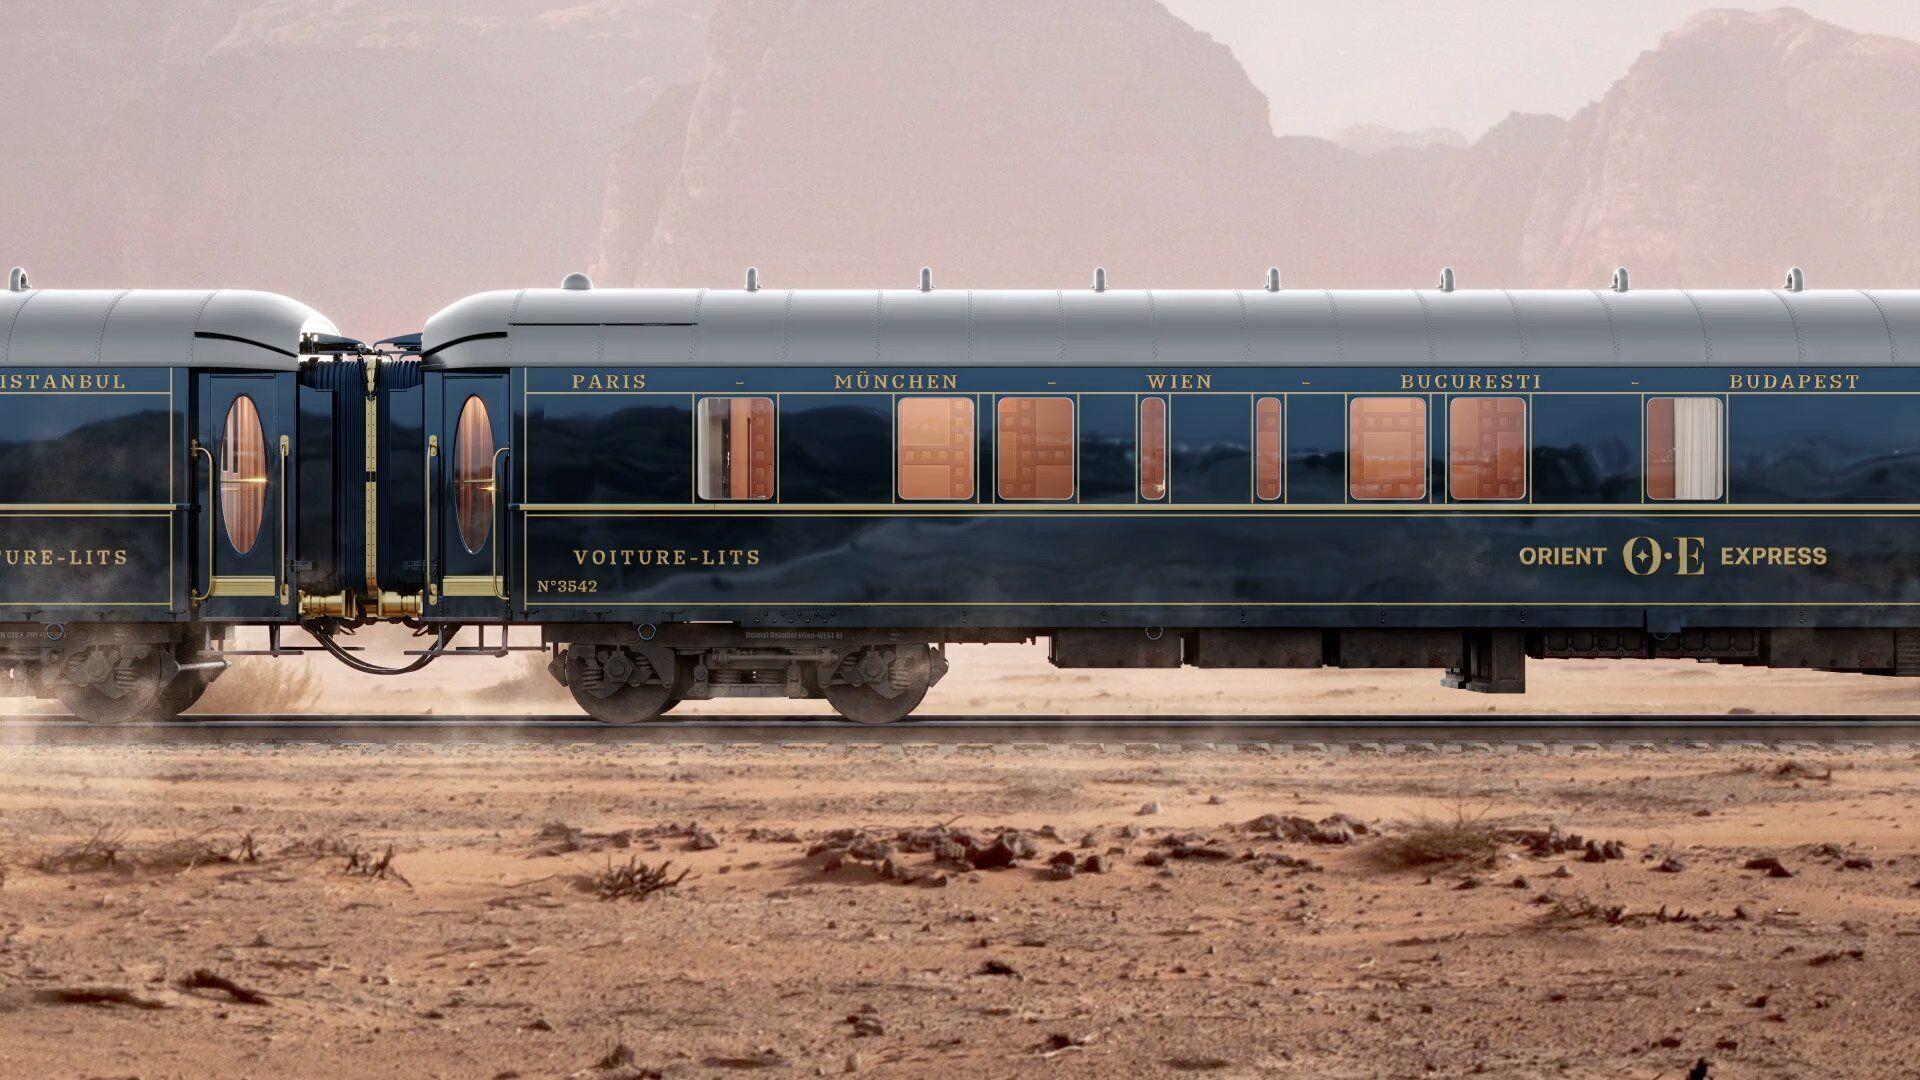 The Orient Express Just Revealed the Design for Its Stunning Presidential  Suite — See Inside